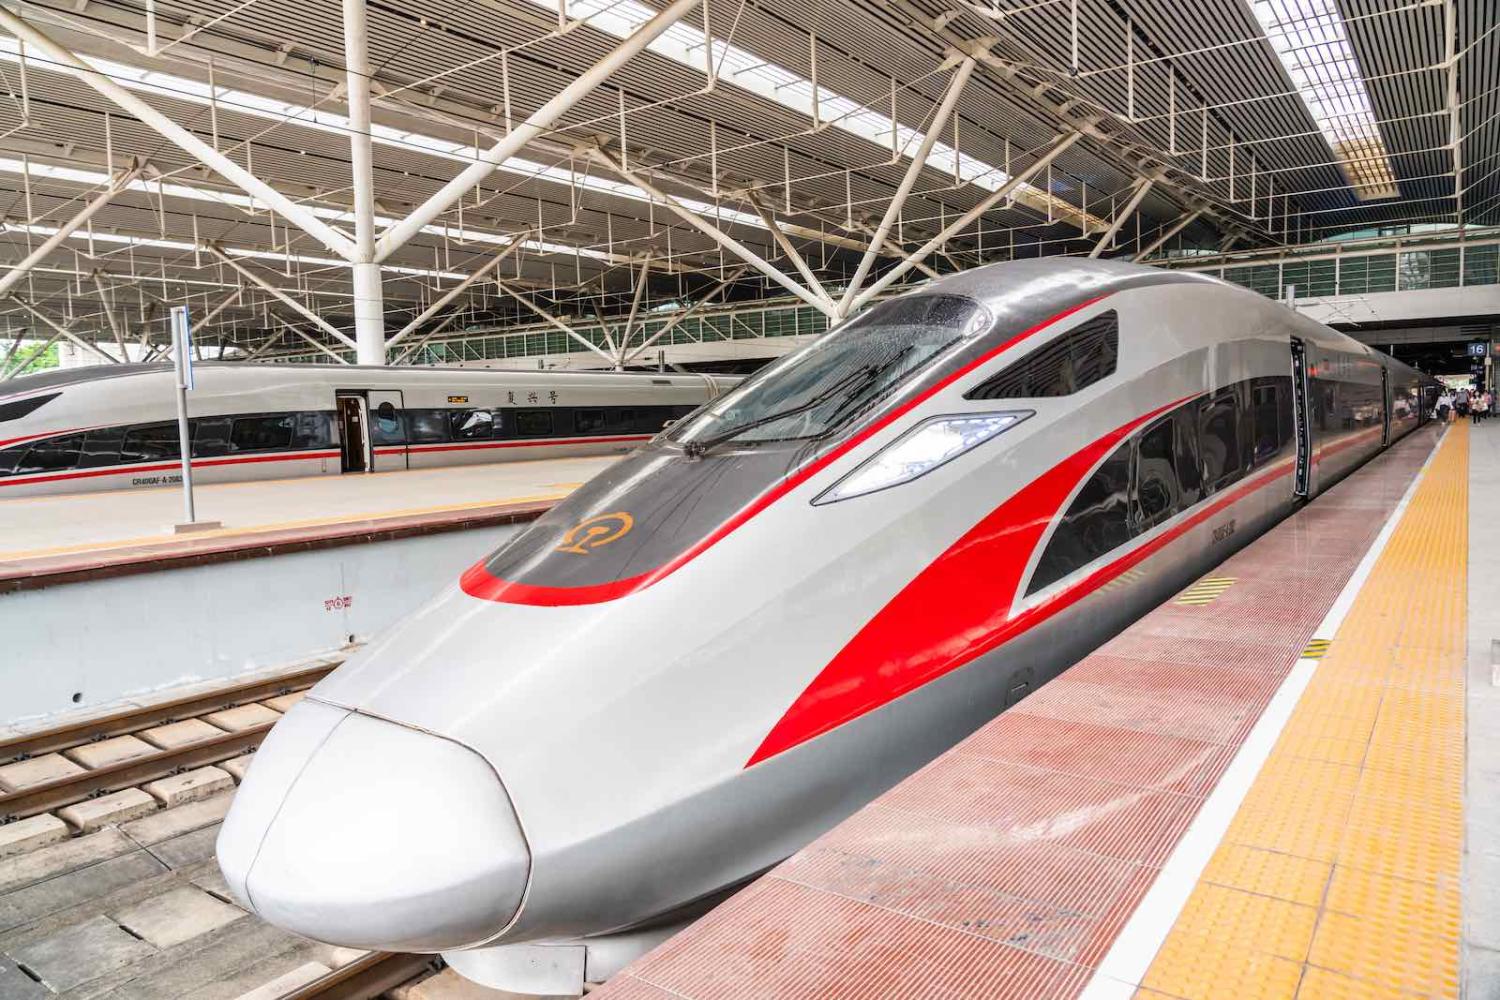 Fuxing high-speed trains operated by China Railway Corporation at Shenzhen North Railway Station in Guangdong province, 7 October (Alex Tai/SOPA Images/LightRocket via Getty Images)